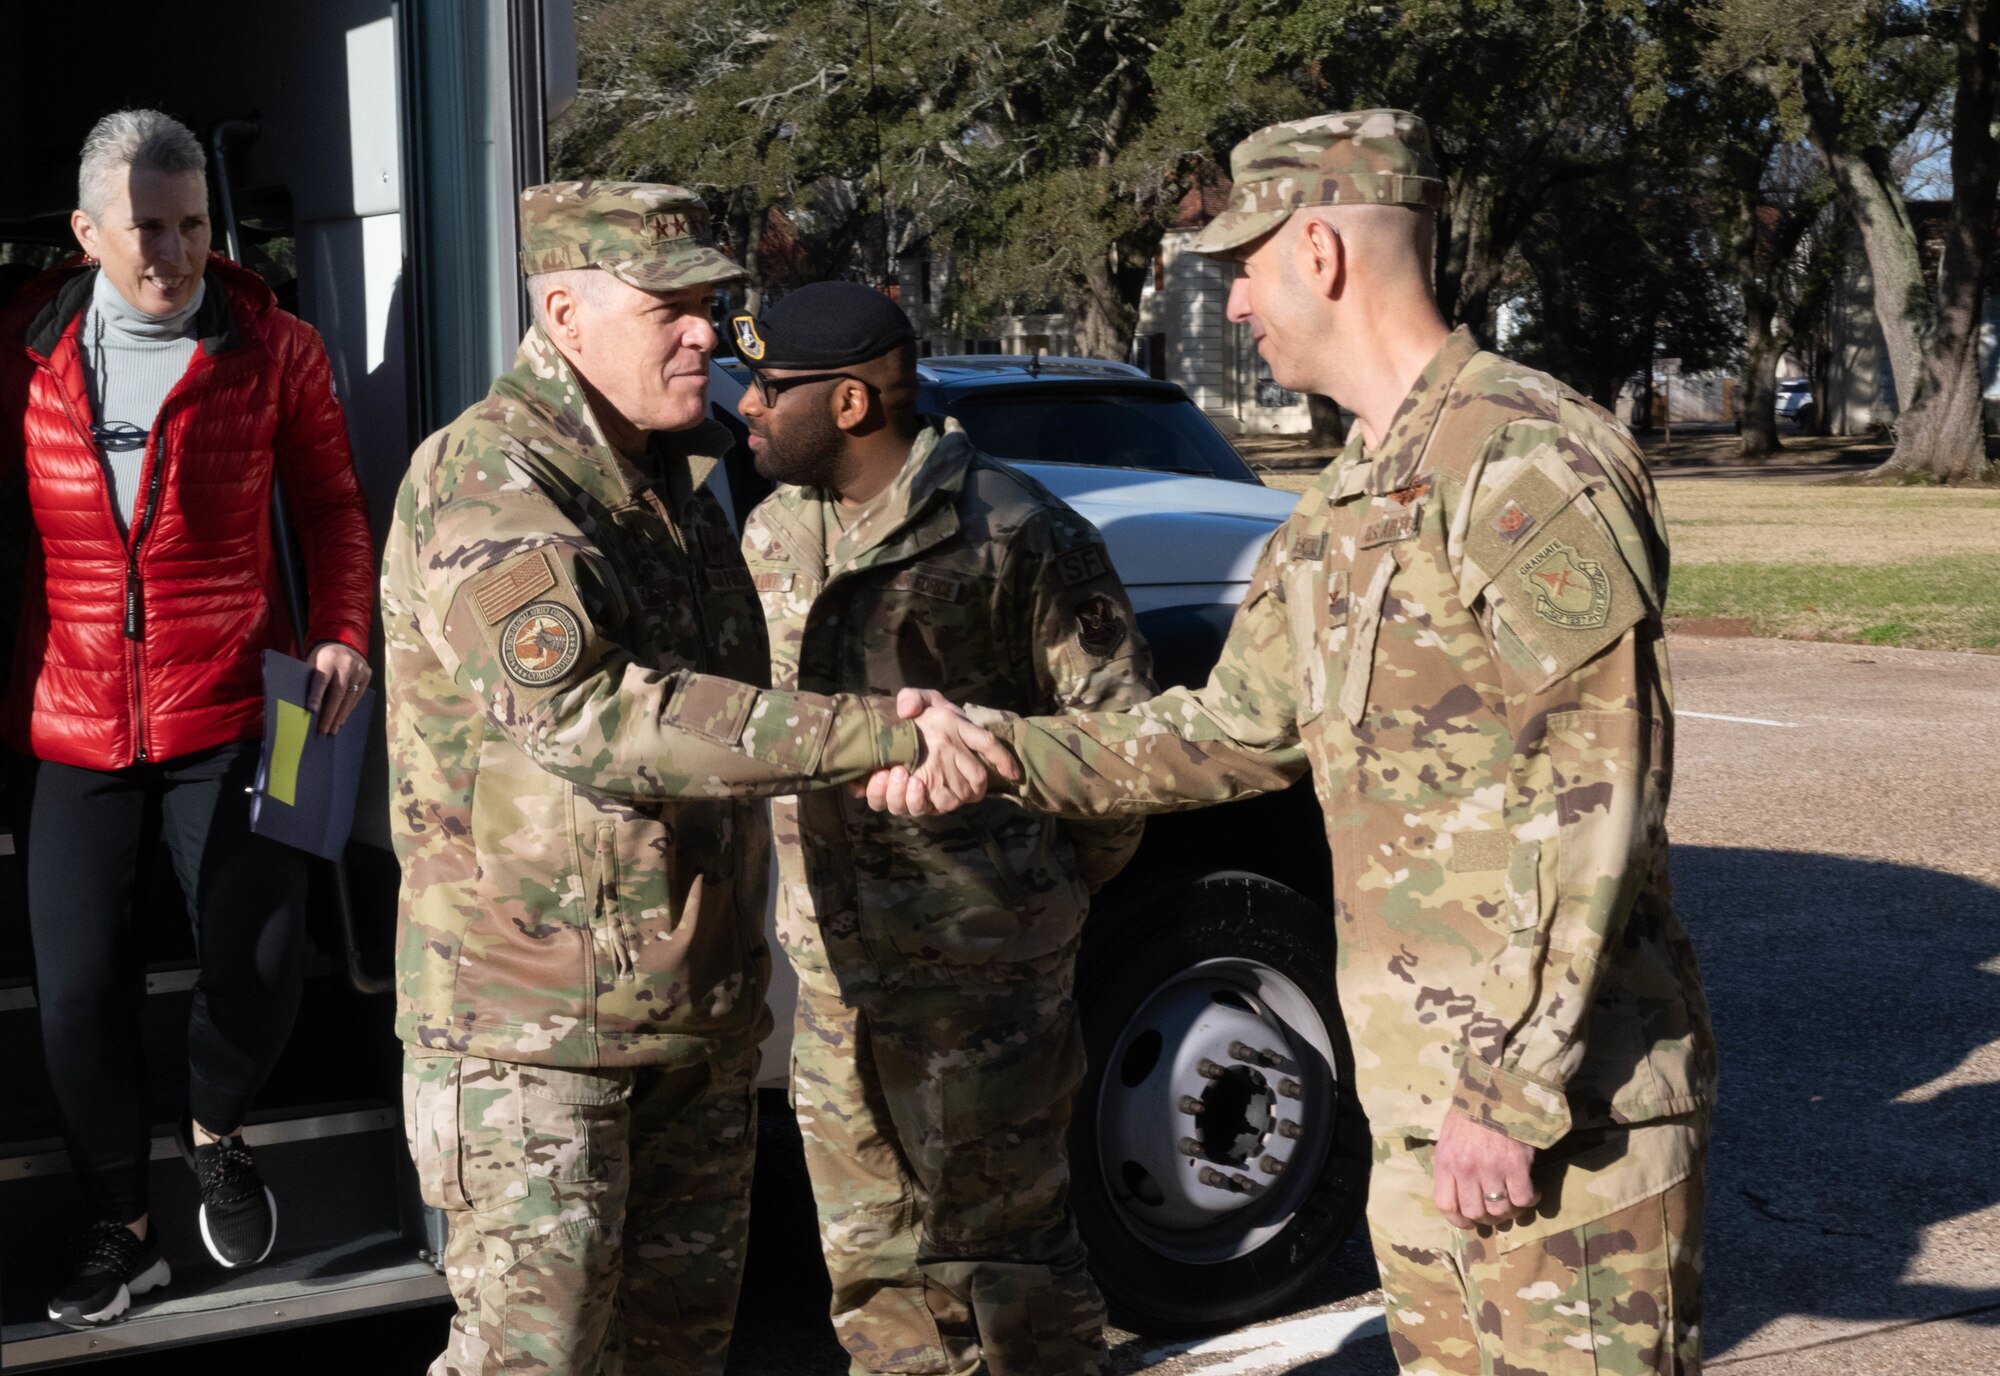 U.S. Air Force Gen. Thomas Bussiere, Air Force Global Strike Command (AFGSC) commander, greets Col. Joseph McKenna, 2nd Bomb Wing vice commander, outside the wing headquarters building during a tour, Barksdale Air Force Base, La., Jan. 26, 2023.